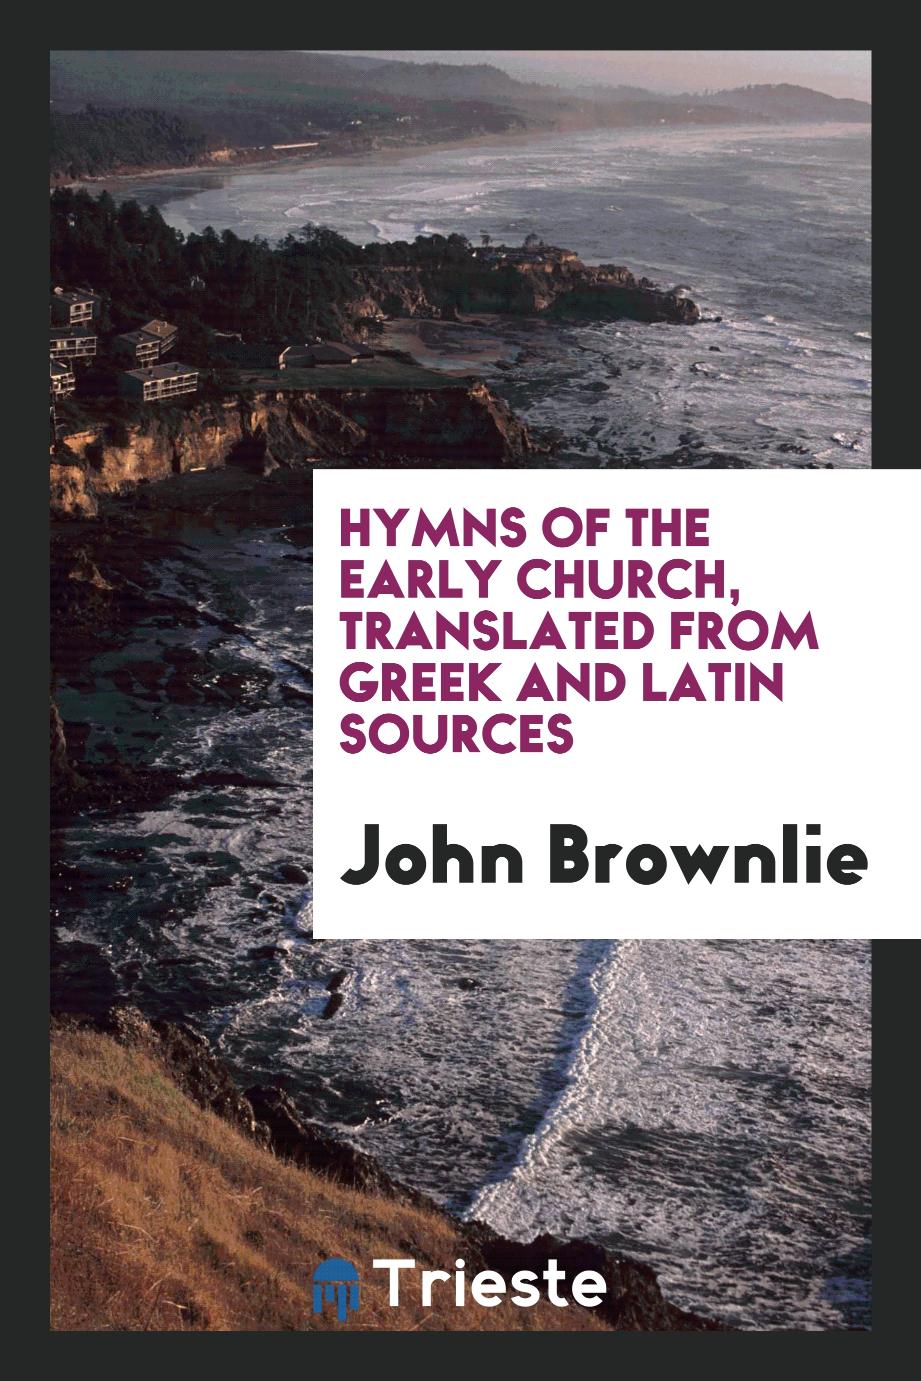 Hymns of the early church, translated from Greek and Latin sources